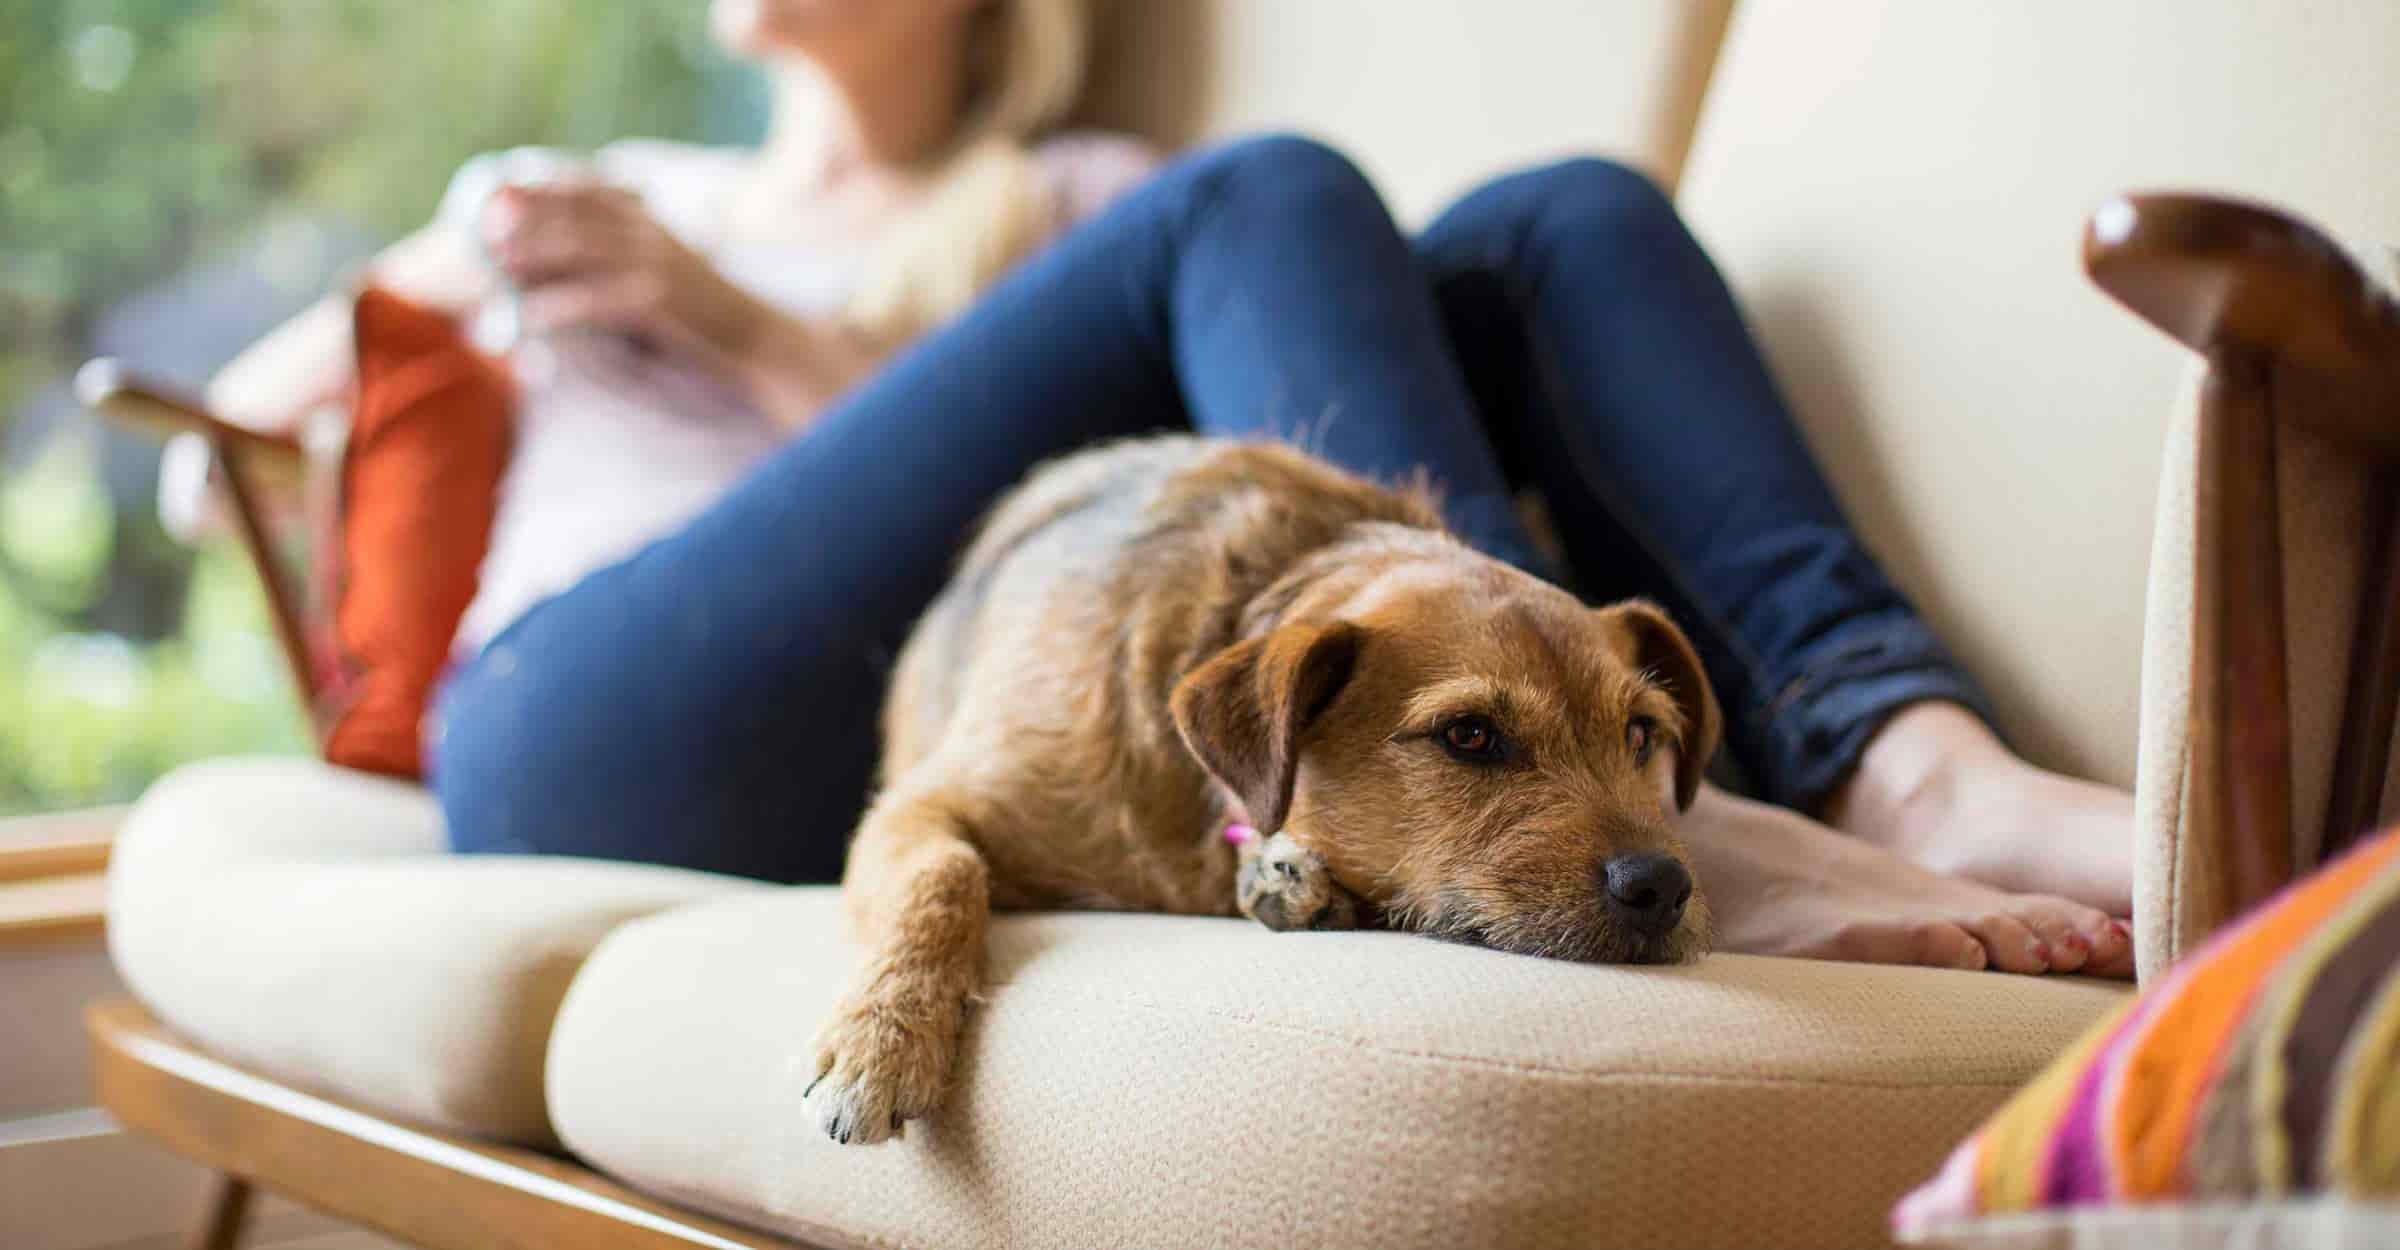 What are some tips on how to treat separation anxiety in